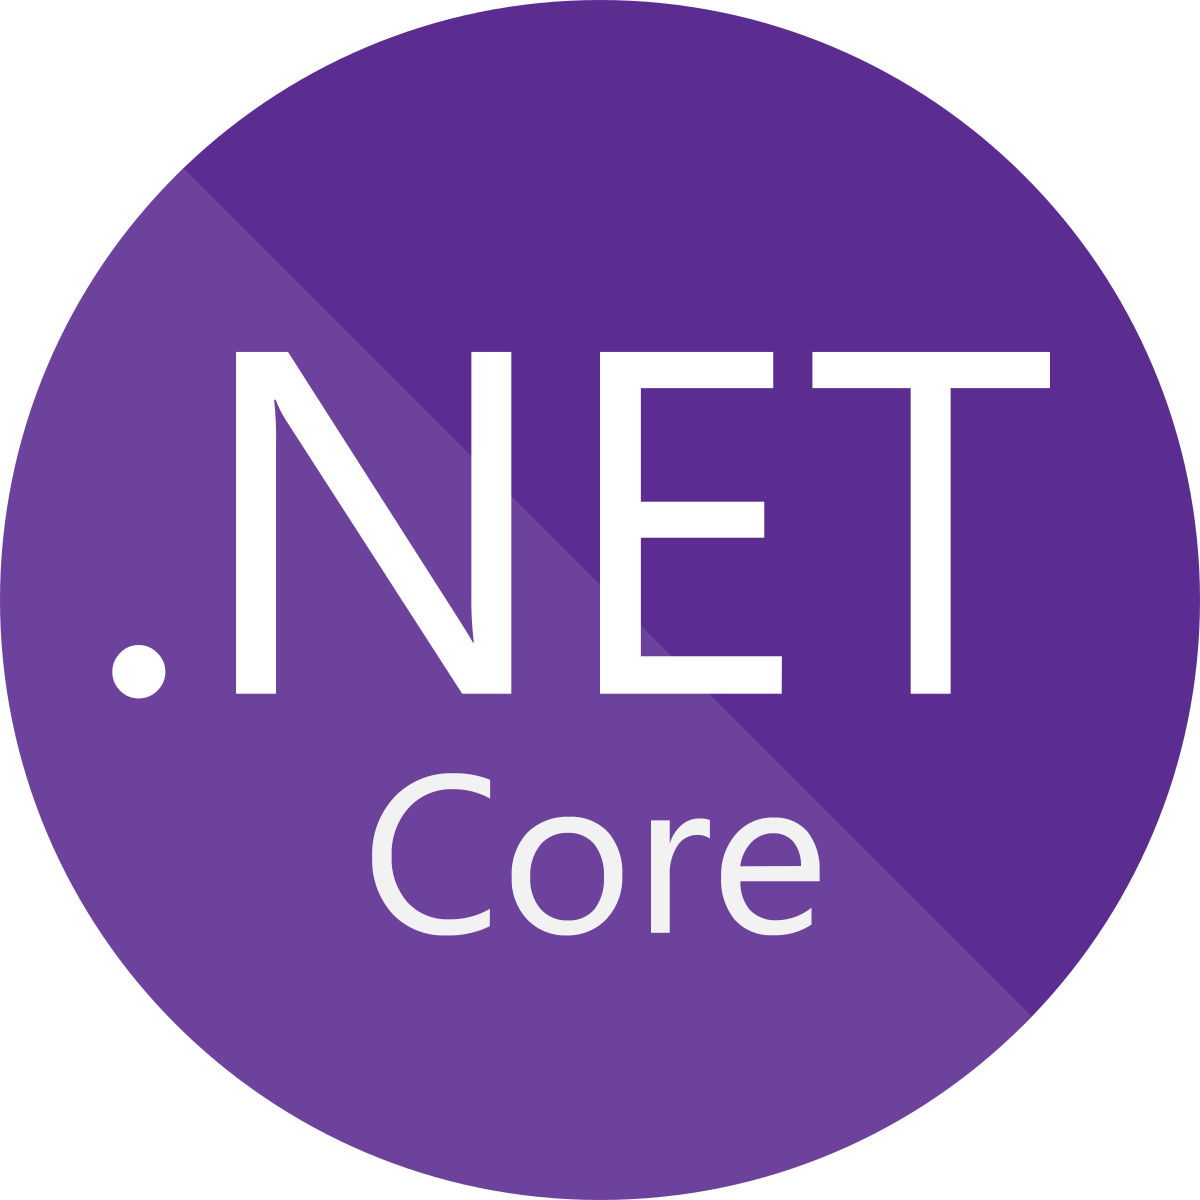 netcore.png